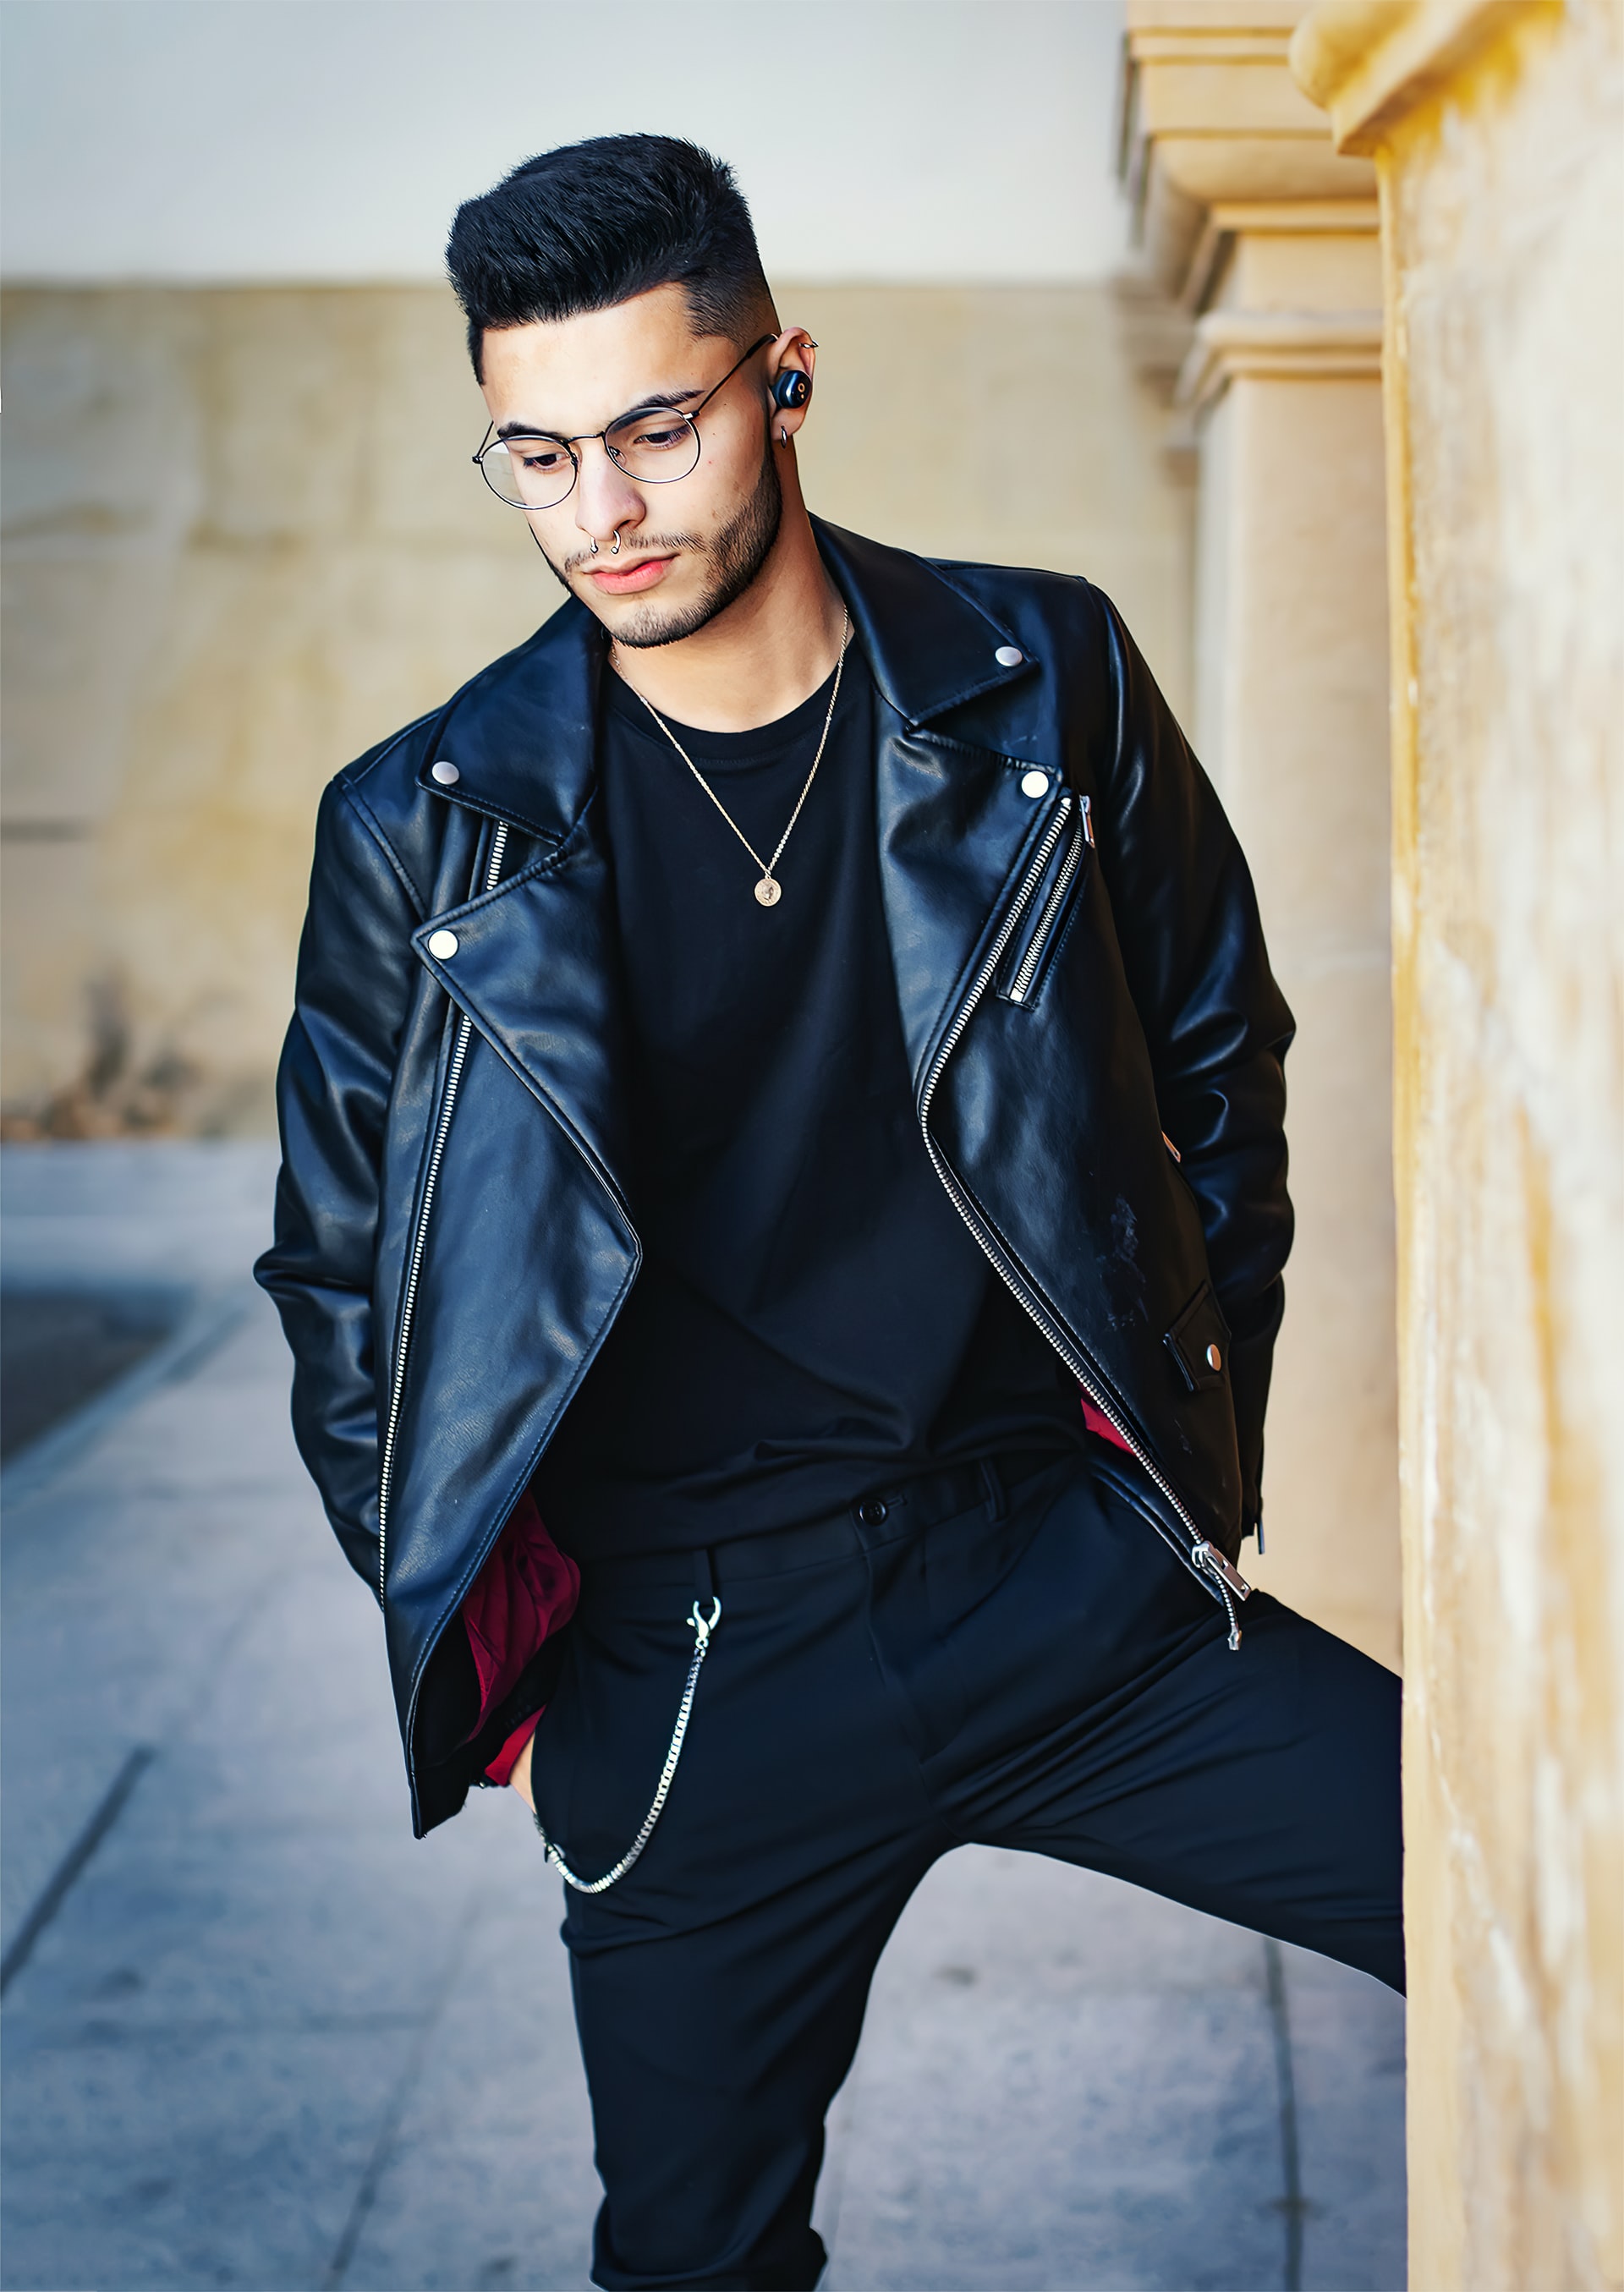 How to style black leather jackets. All back outfits. Ph. Ramon Mula Garcia, Unsplash